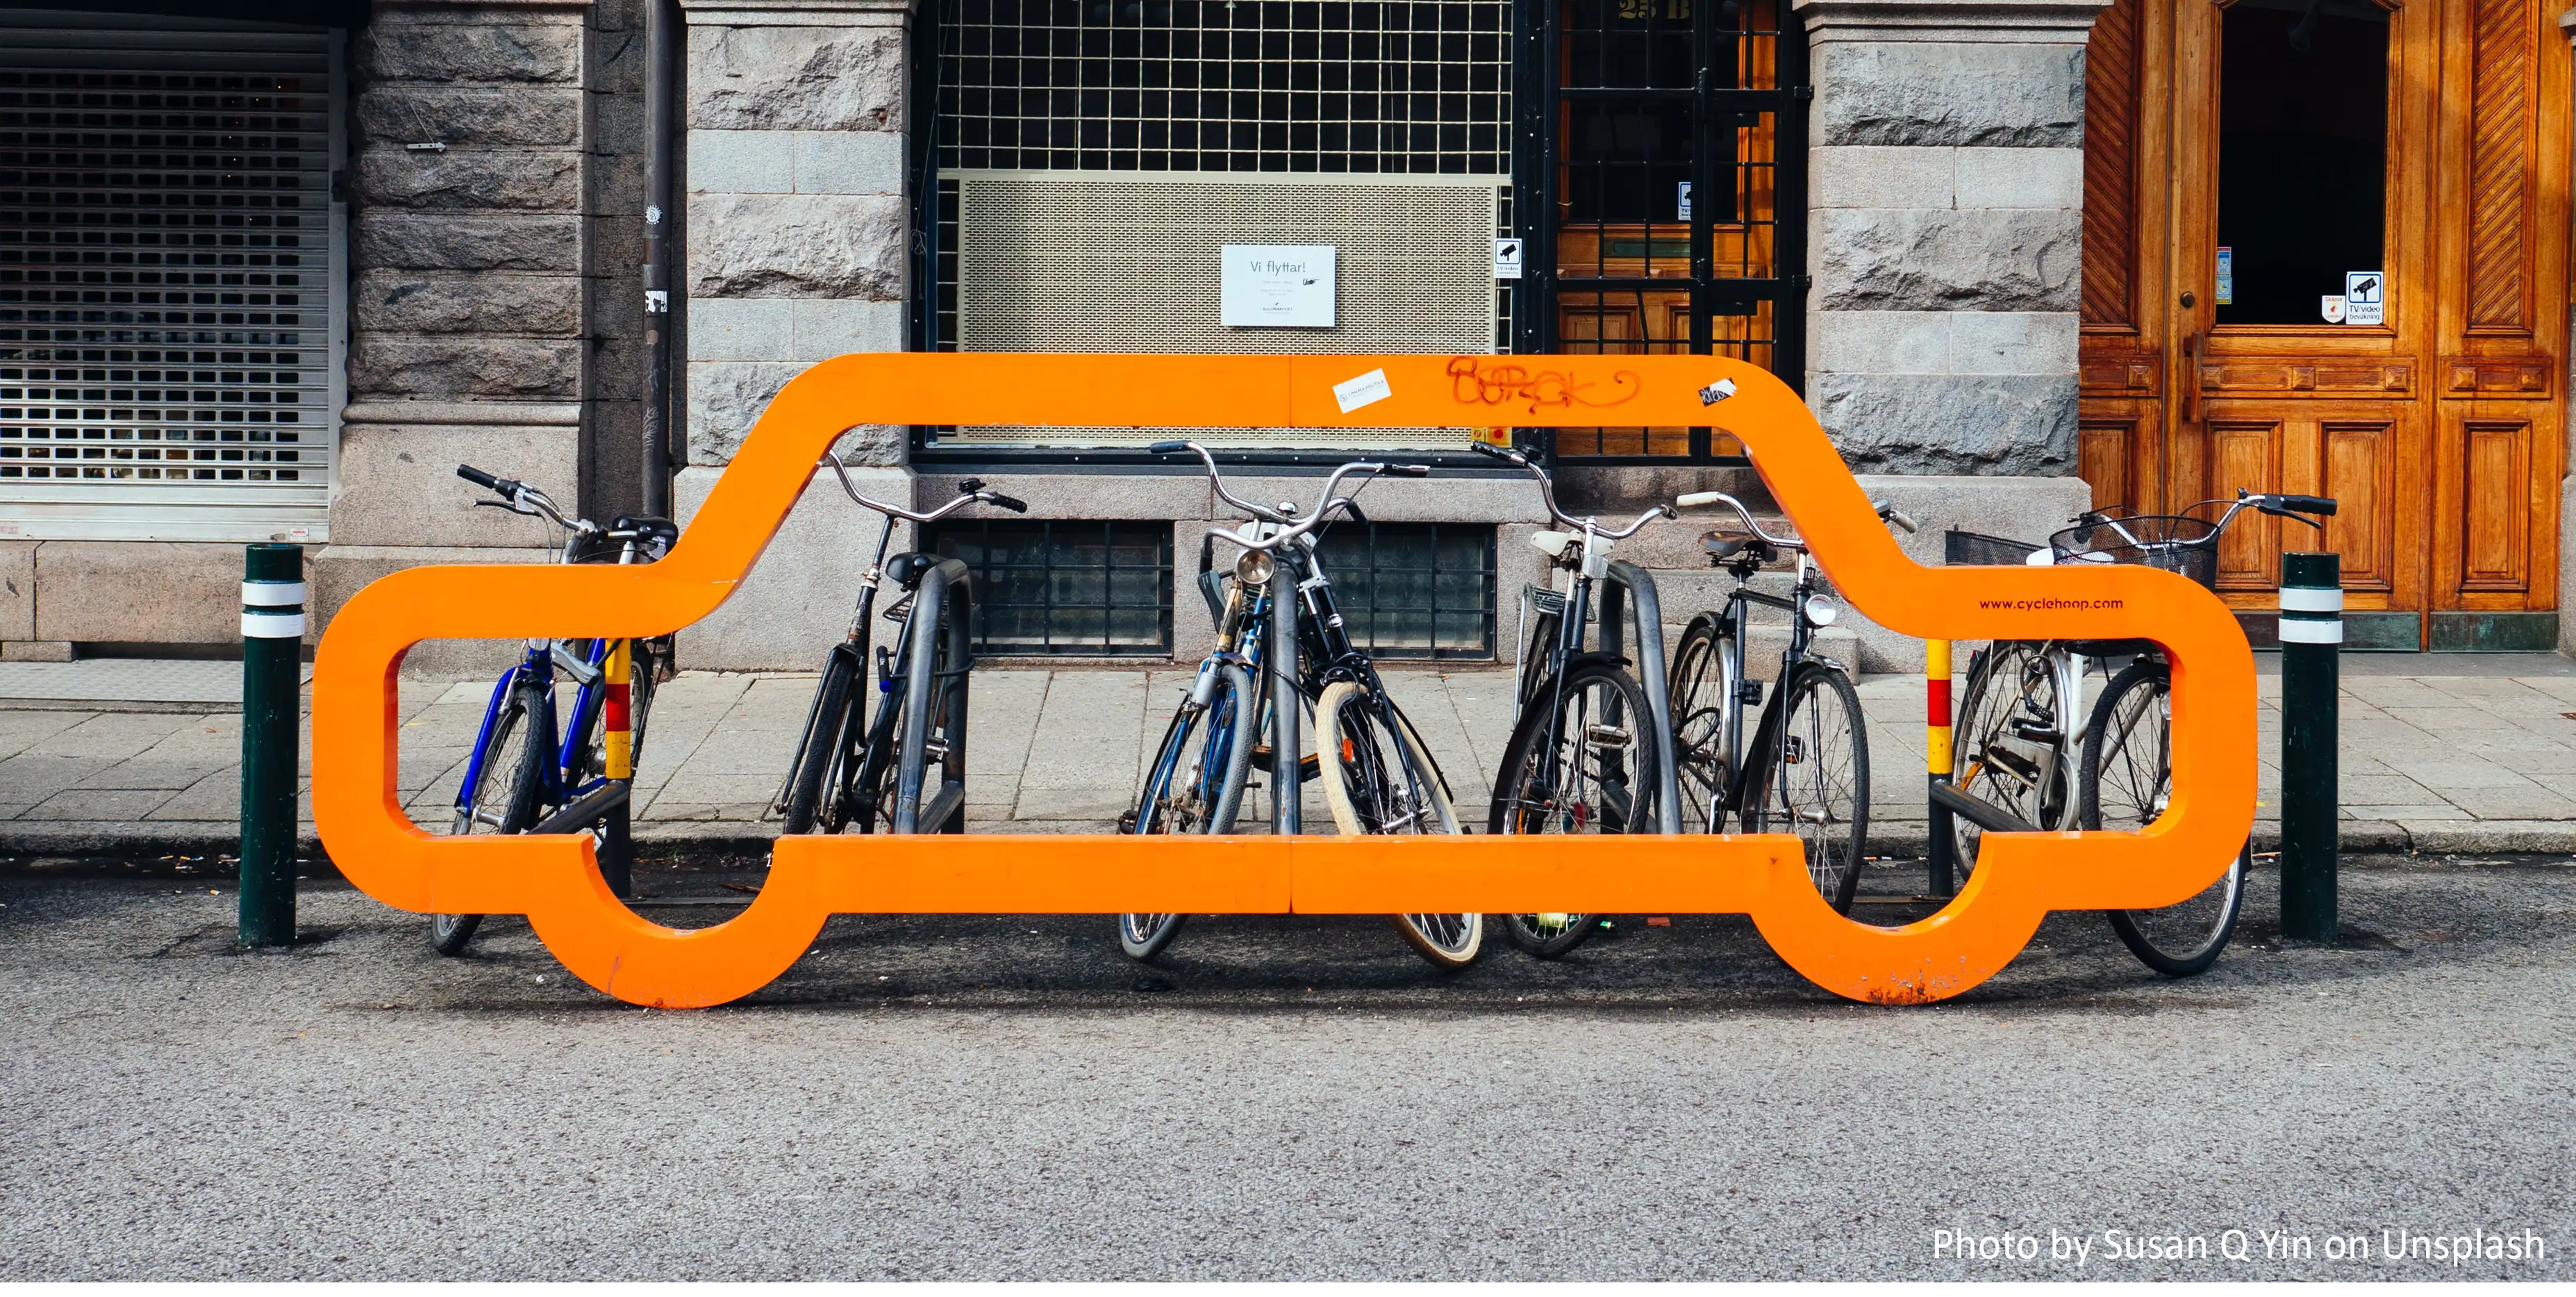 Mobility concepts for parking space reduction: Innovative approaches and tools